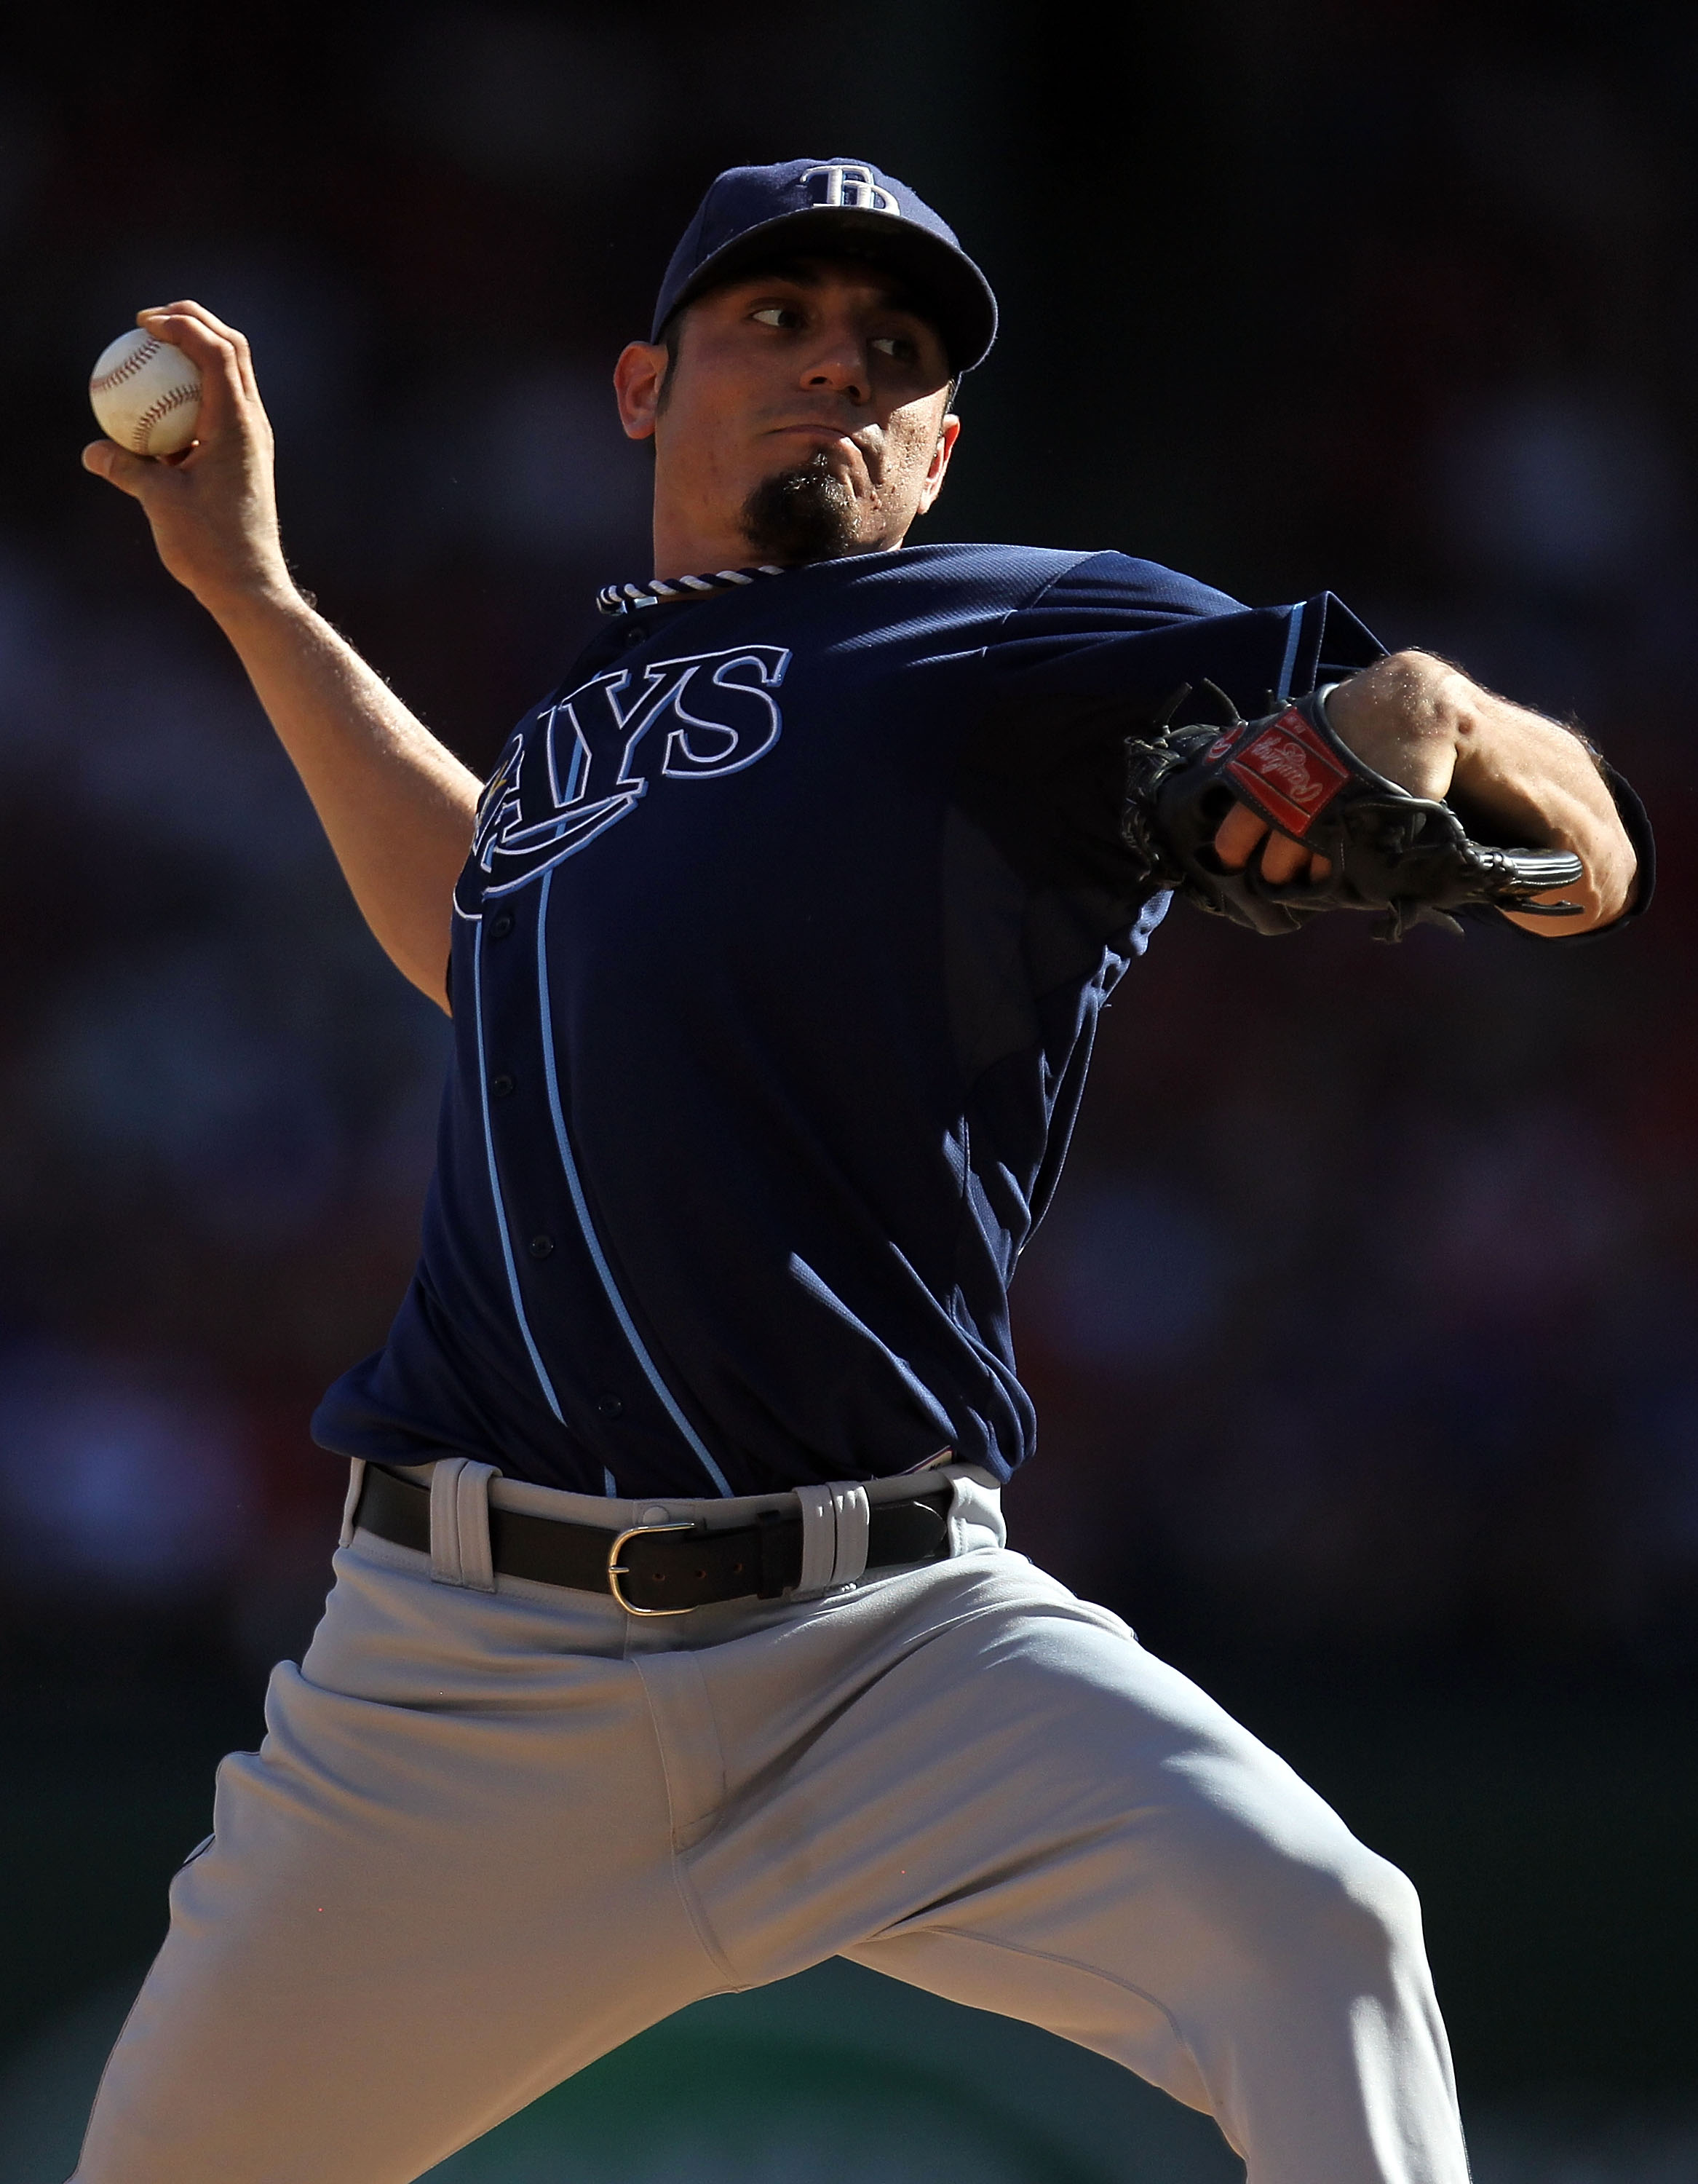 ARLINGTON, TX - OCTOBER 09:  Pitcher Matt Garza #22 of the Tampa Bay Rays throws against the Texas Rangers during game 3 of the ALDS at Rangers Ballpark in Arlington on October 9, 2010 in Arlington, Texas.  (Photo by Ronald Martinez/Getty Images)